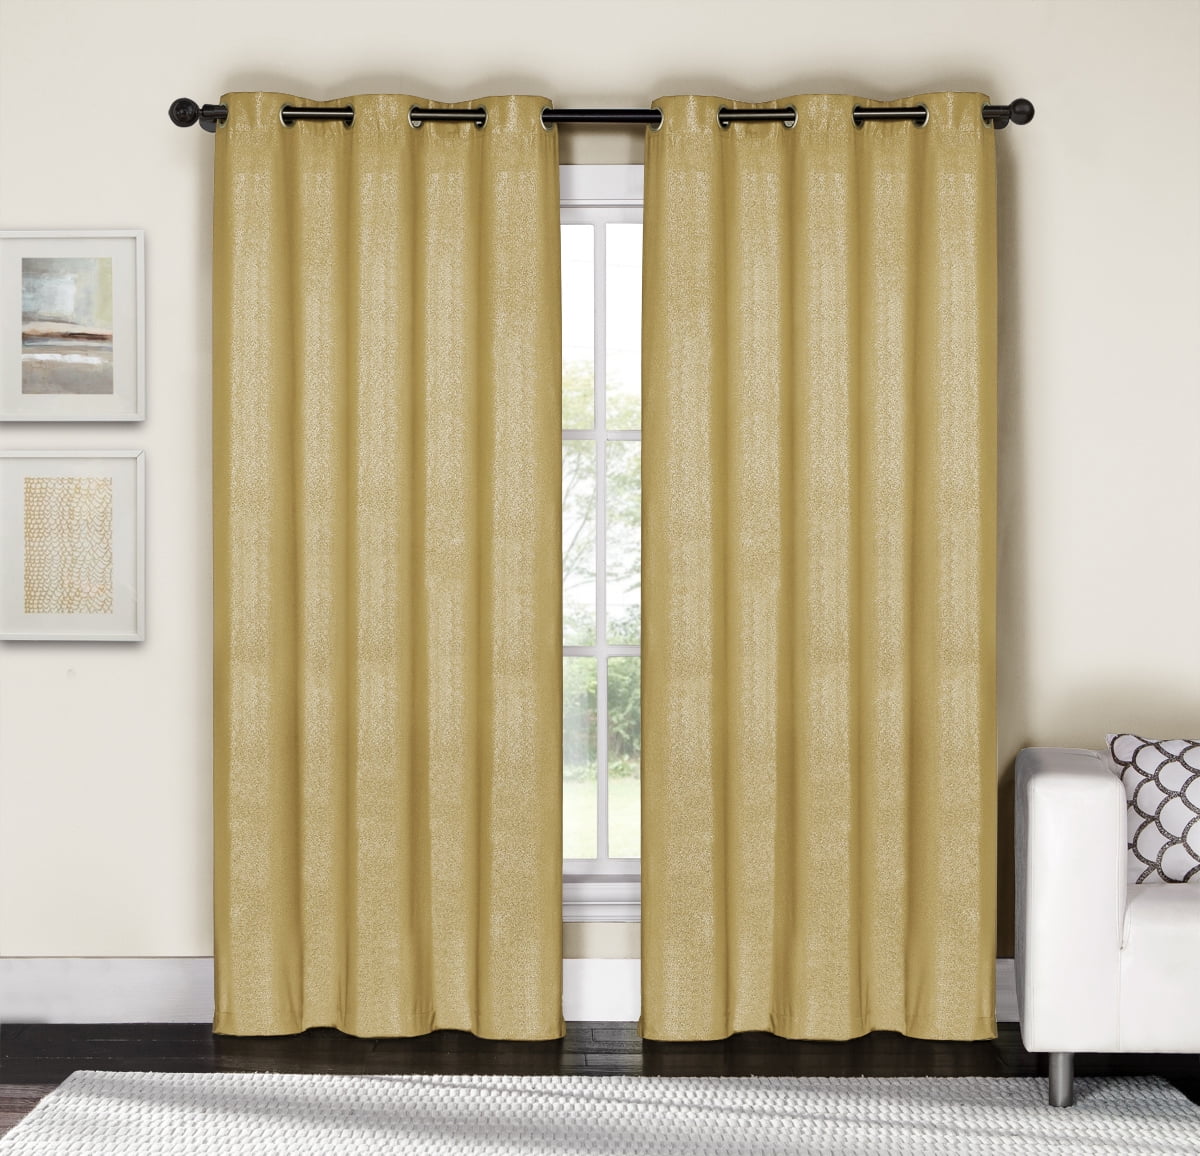 Gold and Silver Metallic Grommet Window Curtain Panel Pair: Cotton Blend, 76"W x 84"L